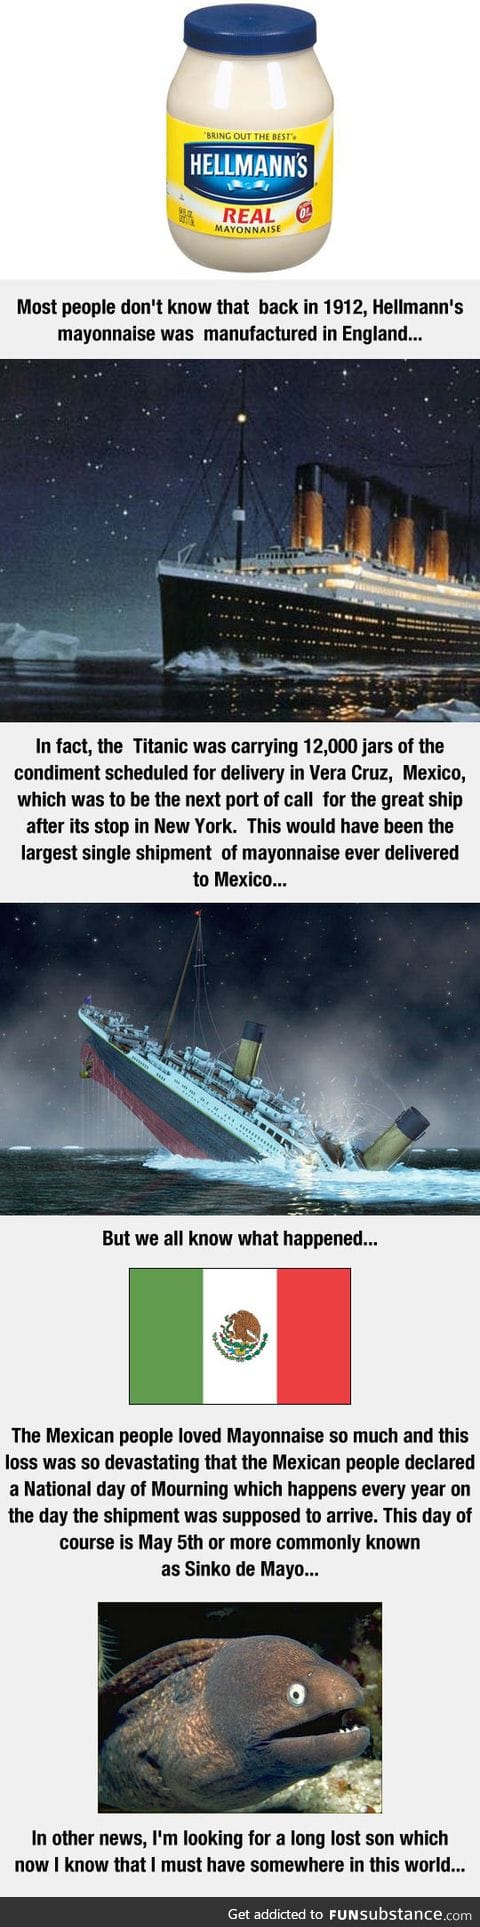 Something You Didn't Know About The Titanic